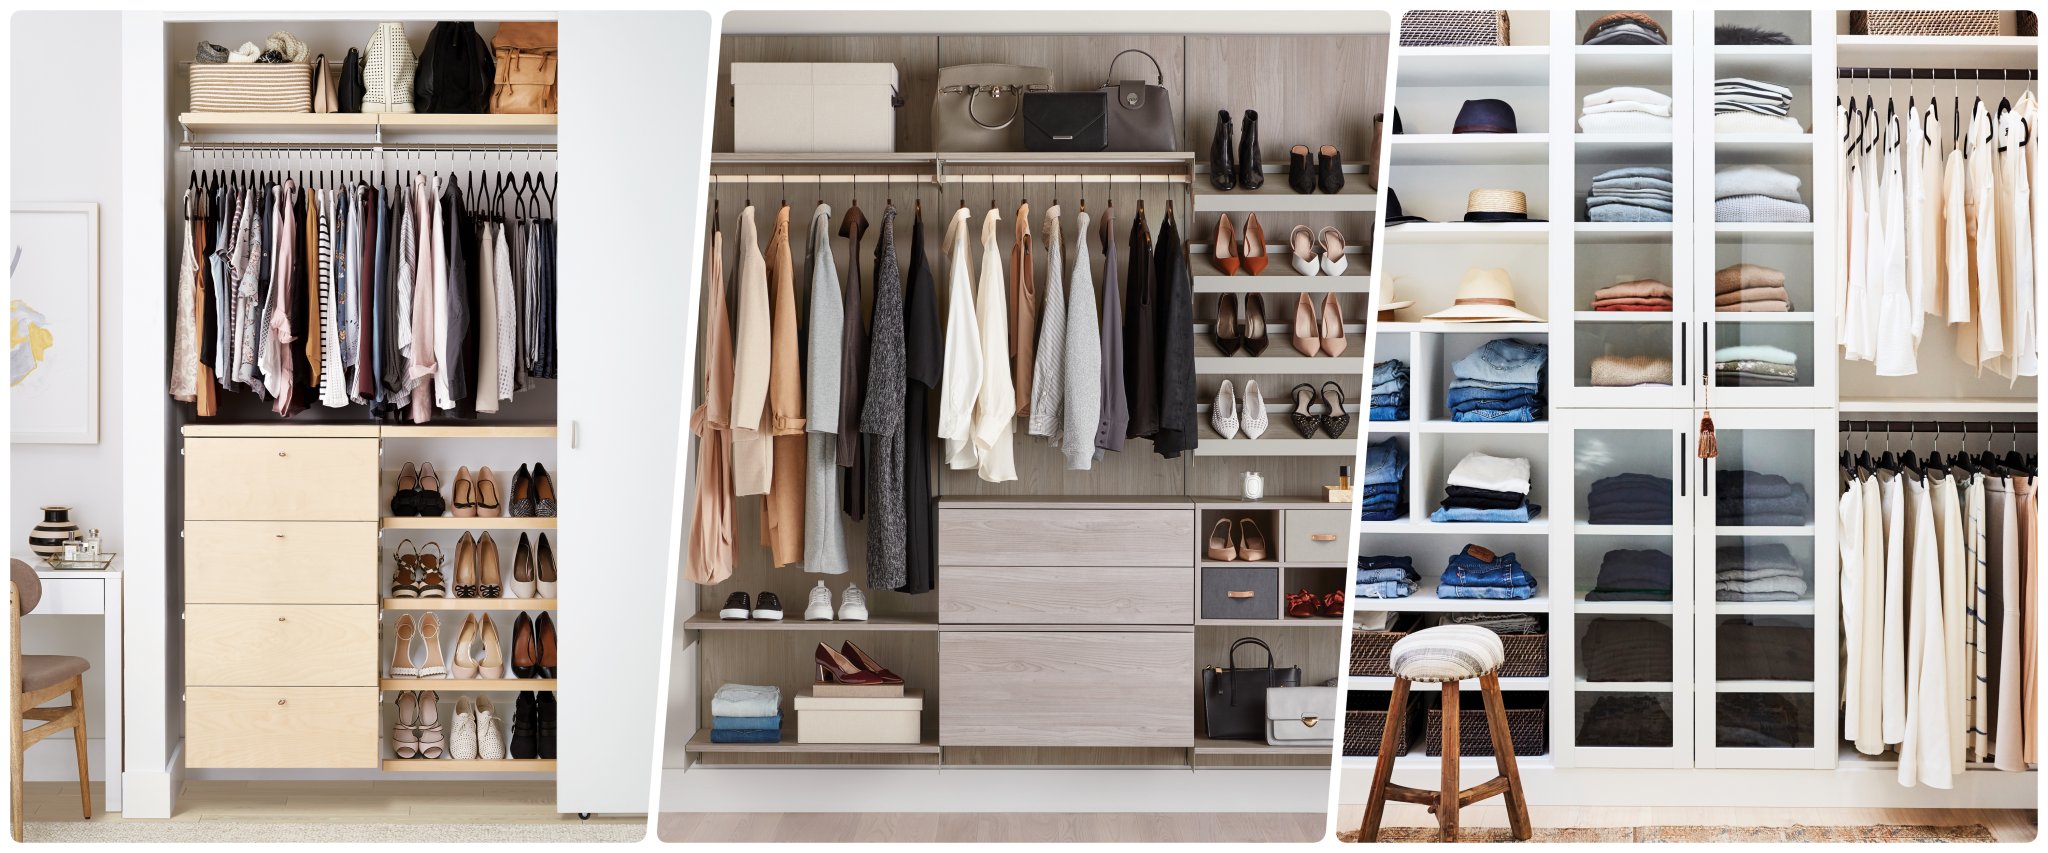 https://www.fashiontrendsetter.com/v2/wp-content/uploads/2019/03/TheContainerStore-Full-Custom-Closet-Feat.png